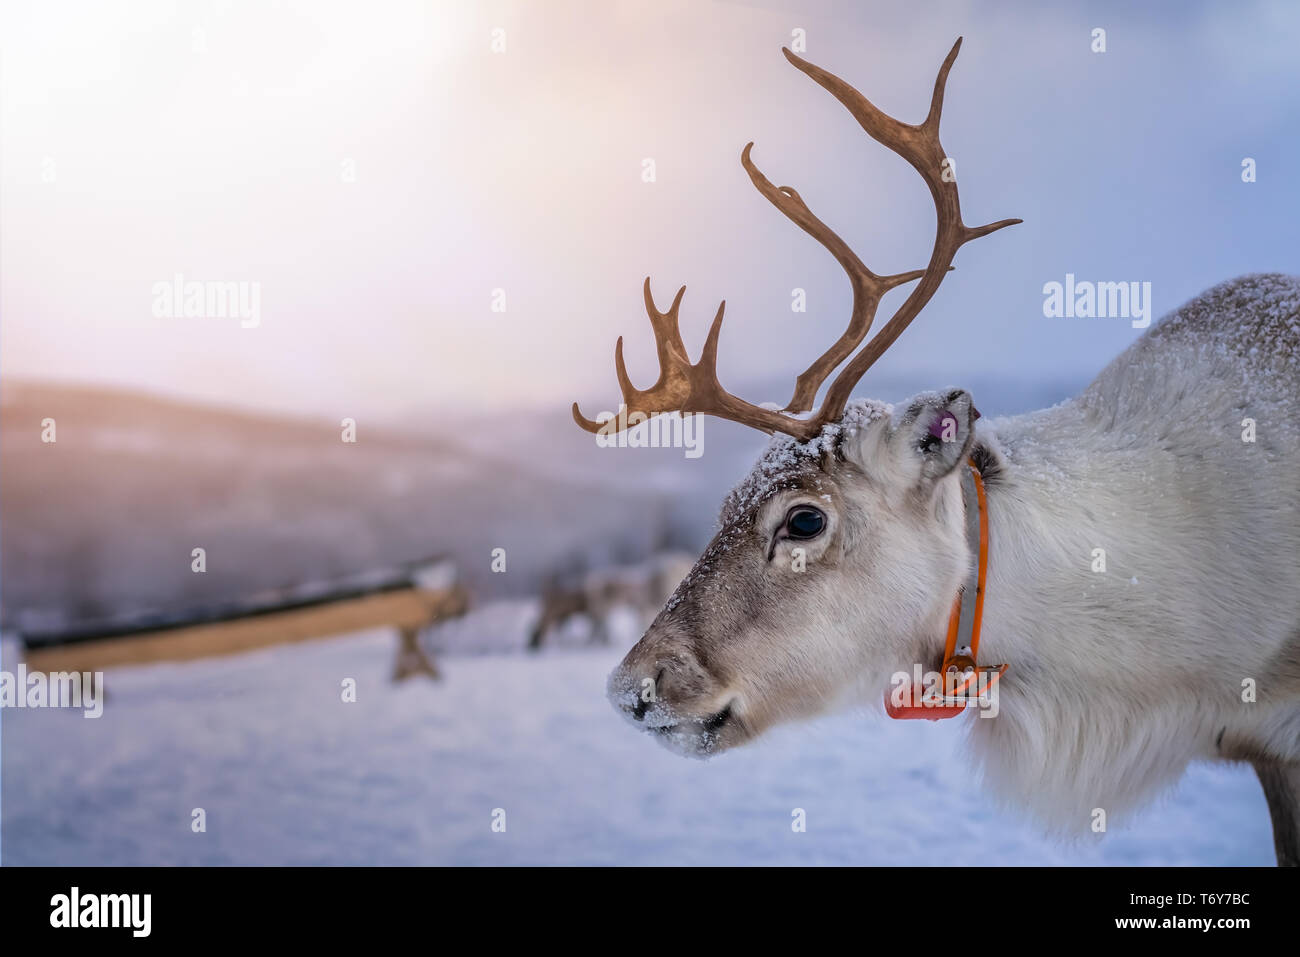 Portrait of a reindeer with massive antlers pulling sleigh in snow, Tromso region, Northern Norway Stock Photo